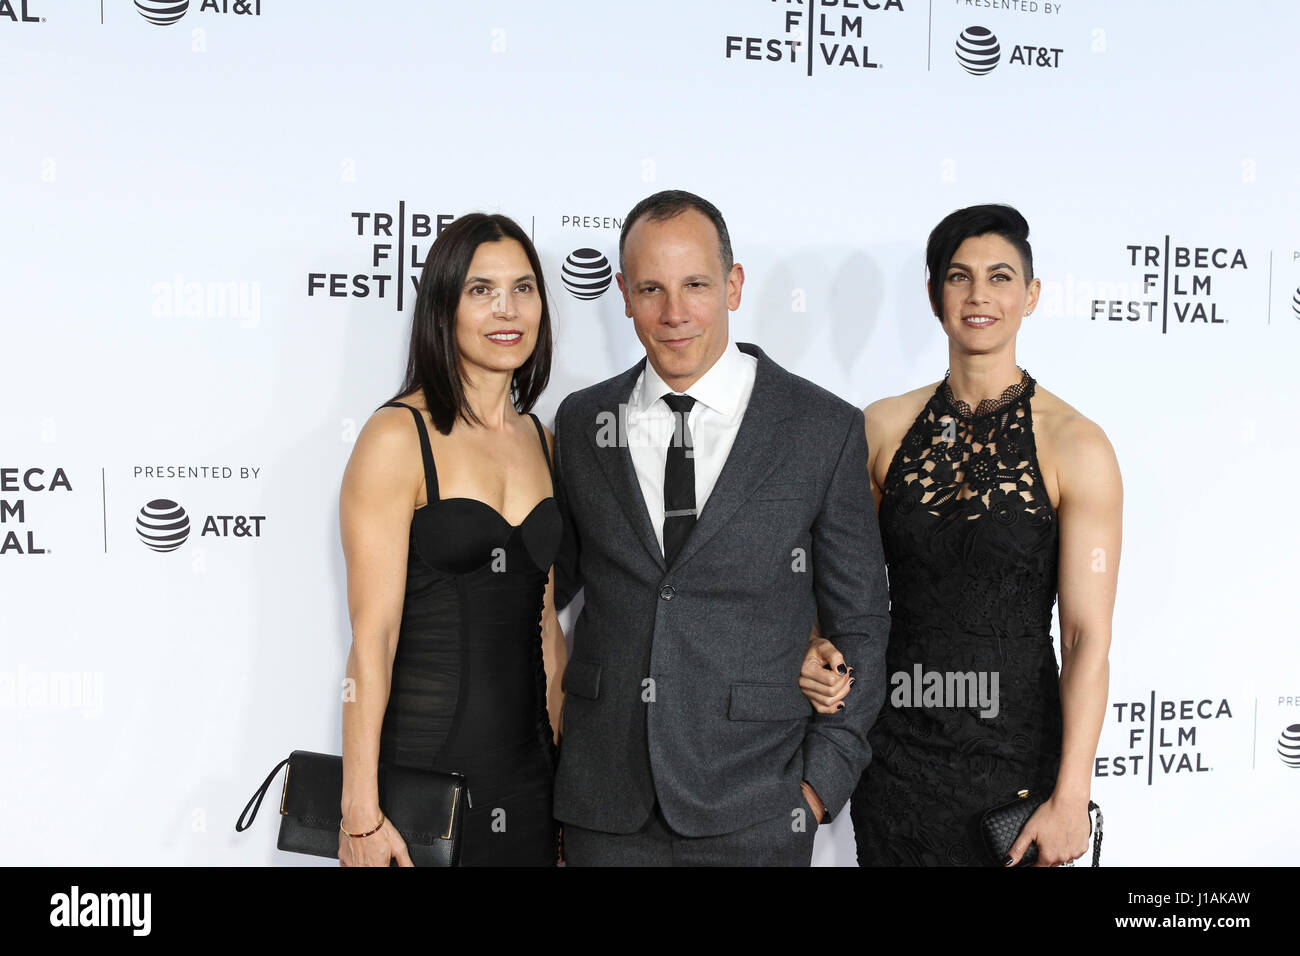 New York, USA. 19. April 2017. Tribeca CEO Adrew Essex kommt bei der 2017 Tribeca Film Festival Opening Night, Clive Davis: The Soundtrack Of Our lebt Credit: The Foto Zugang/Alamy Live News Stockfoto